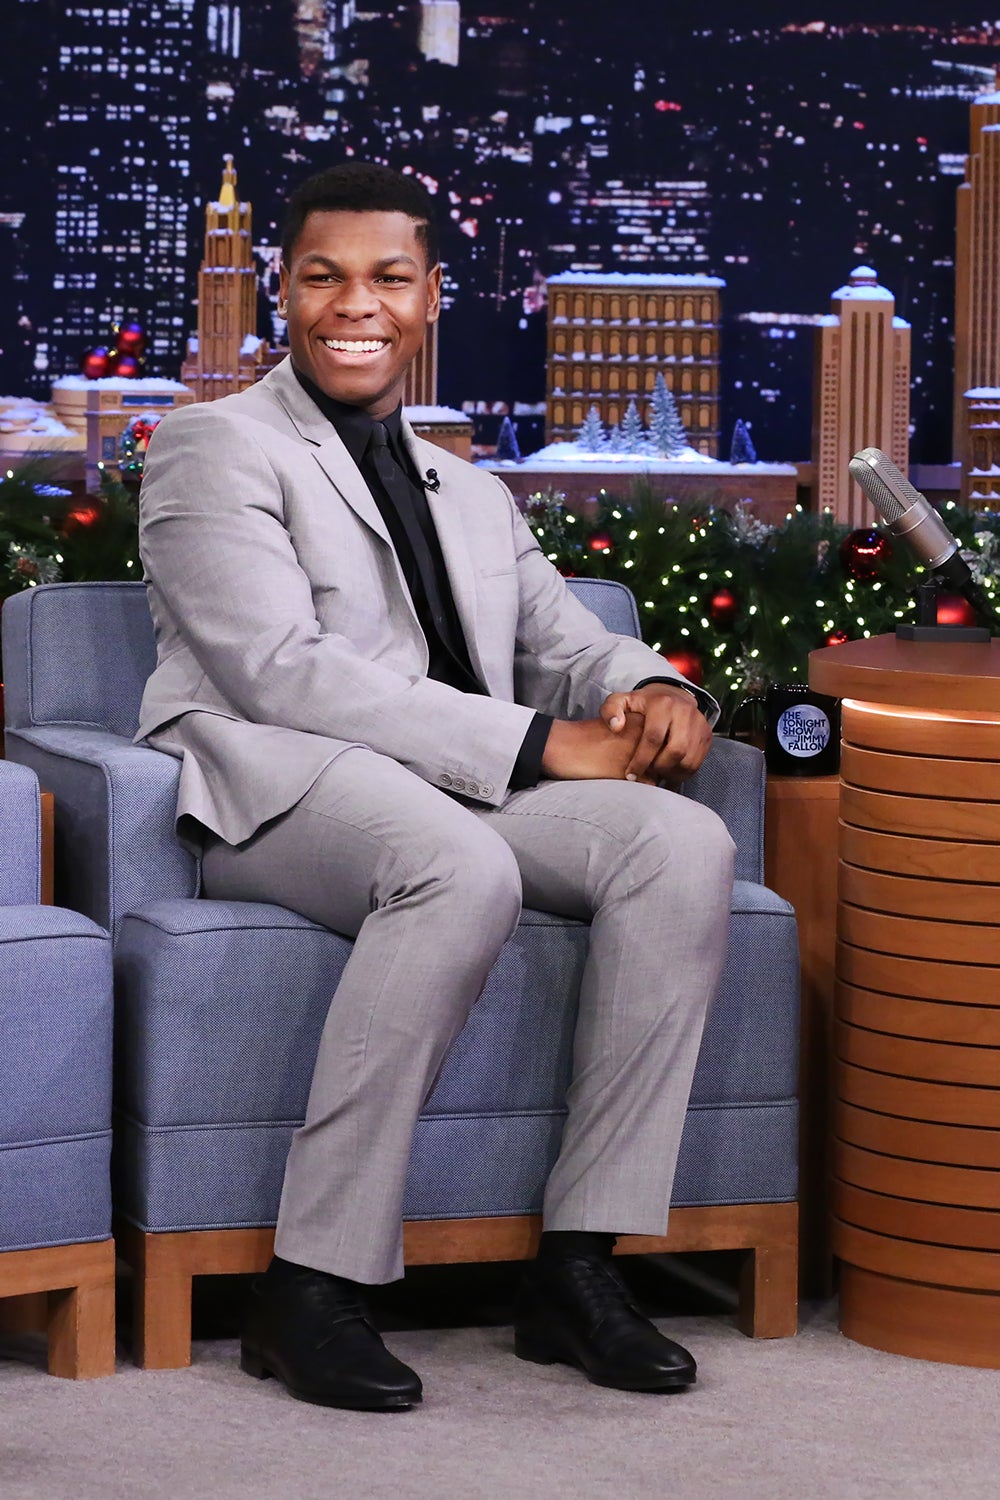 'Star Wars: The Force Awakens' Star John Boyega Says His Friends Thought He Was An Extra